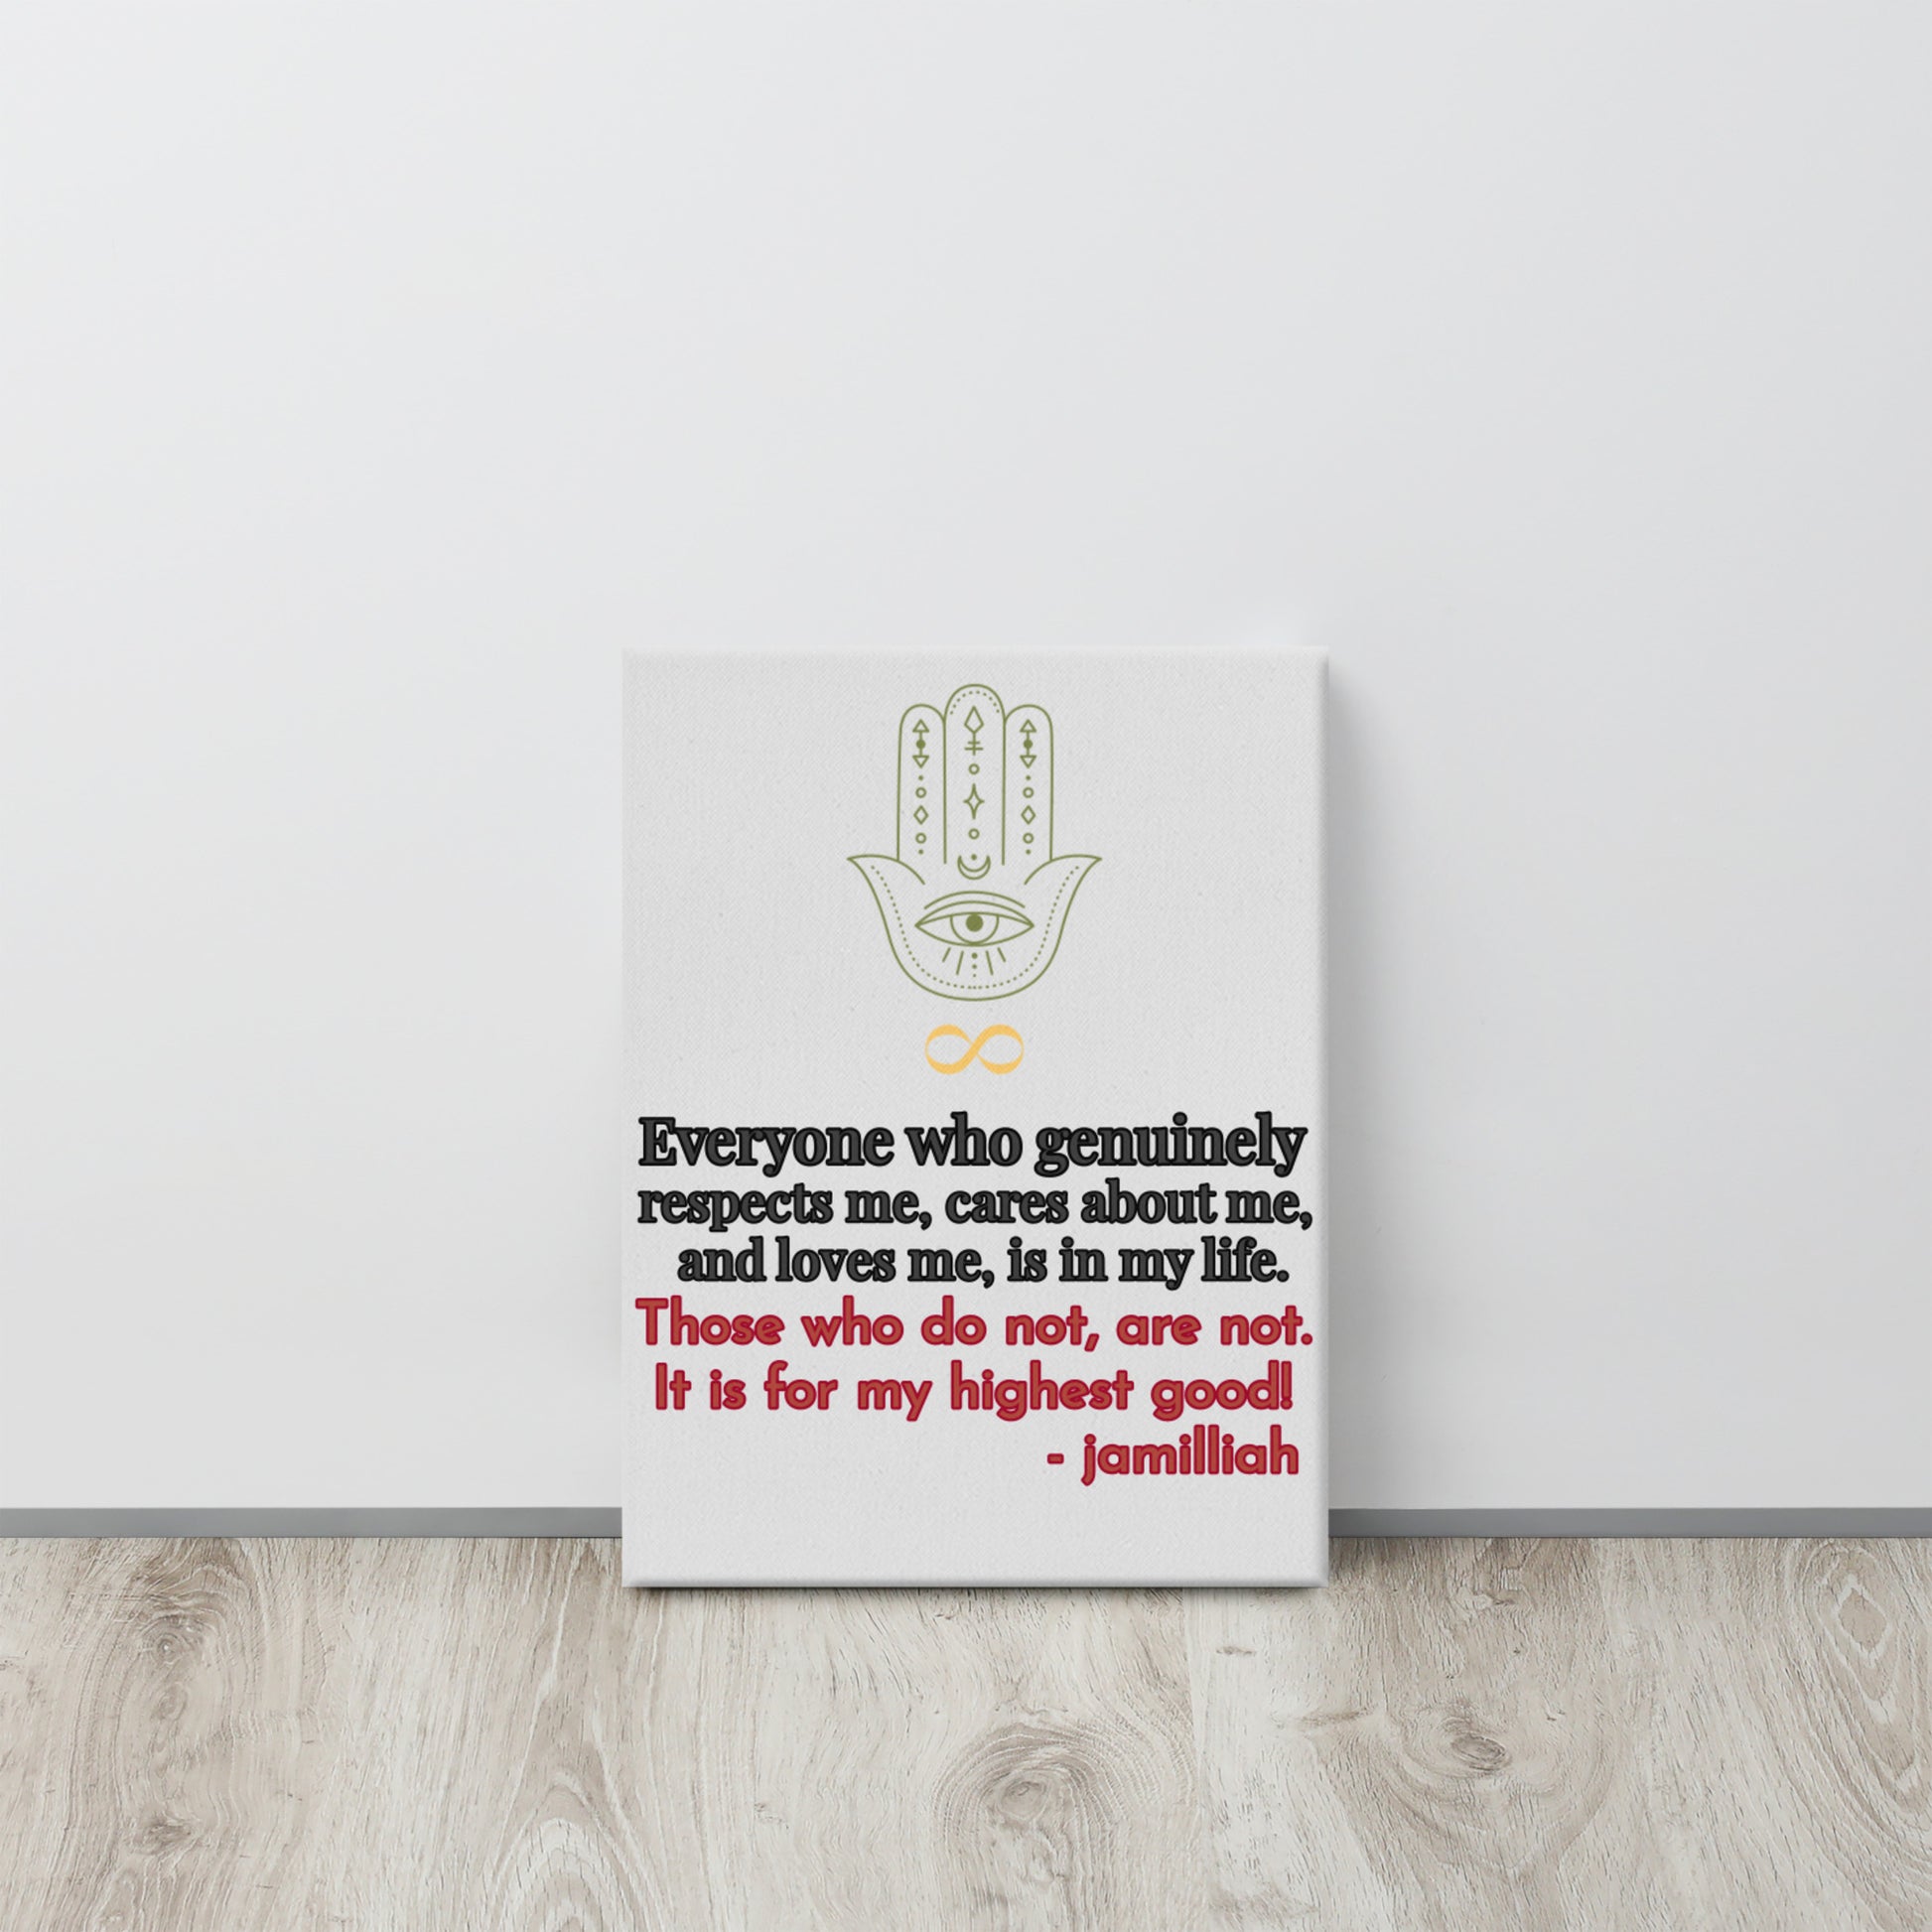 Whisper white/gray, 12x16 inch, textured canvas art print. Spiritual, supernatural green hamsa hand and yellow infinity sign logo image. Original wise quote, mantra, slogan, saying; half written in gray, outlined in black, and written in and outlined in red. "Everyone Who Genuinely Respects Me, Cares About Me, And Loves Me, Is In My Life. Those Who Do Not, Are Not. It Is For My Highest Good!" - Jamilliah - Shown on floor leaning on white wall. JAMILLIAH'S WISDOM IS TIMELESS SHOP - wisdomistimeless.com.